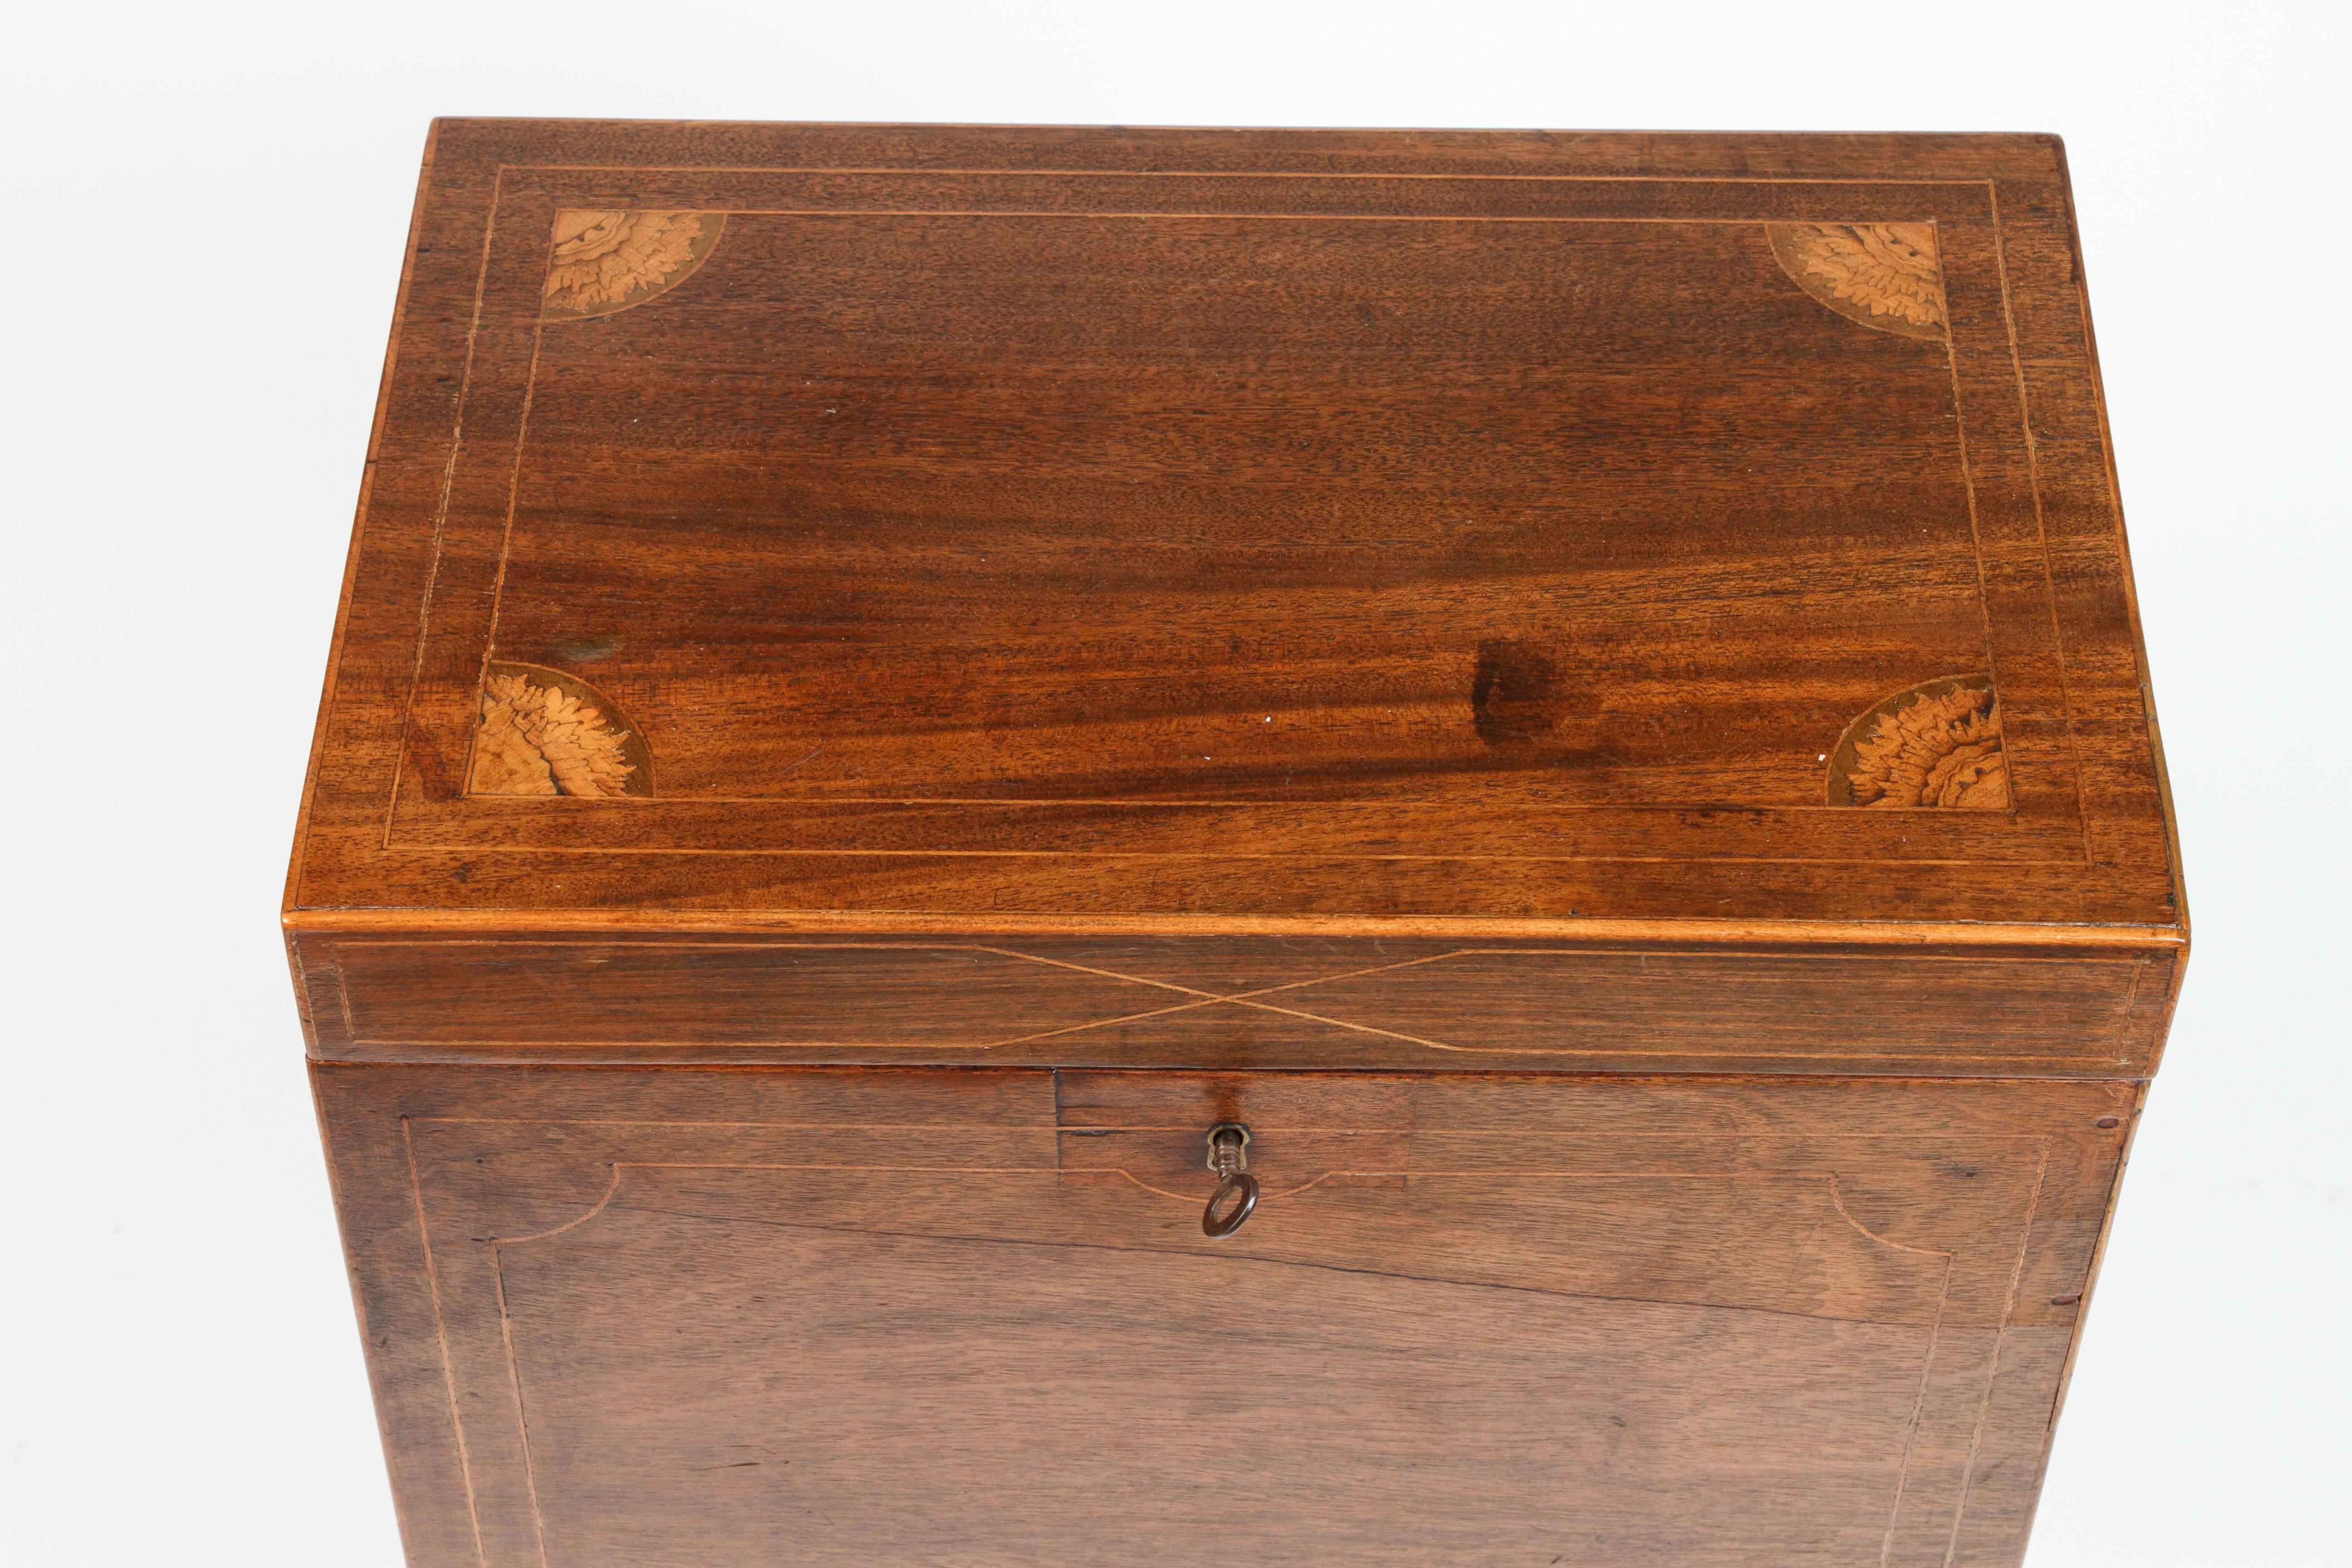 A Sheraton Mahogany Cellarette on a Stand from 1810. This cellarette has an elegant inlay top with leaf design, as well as an interior made to store wine and alcohol in the dining room. 